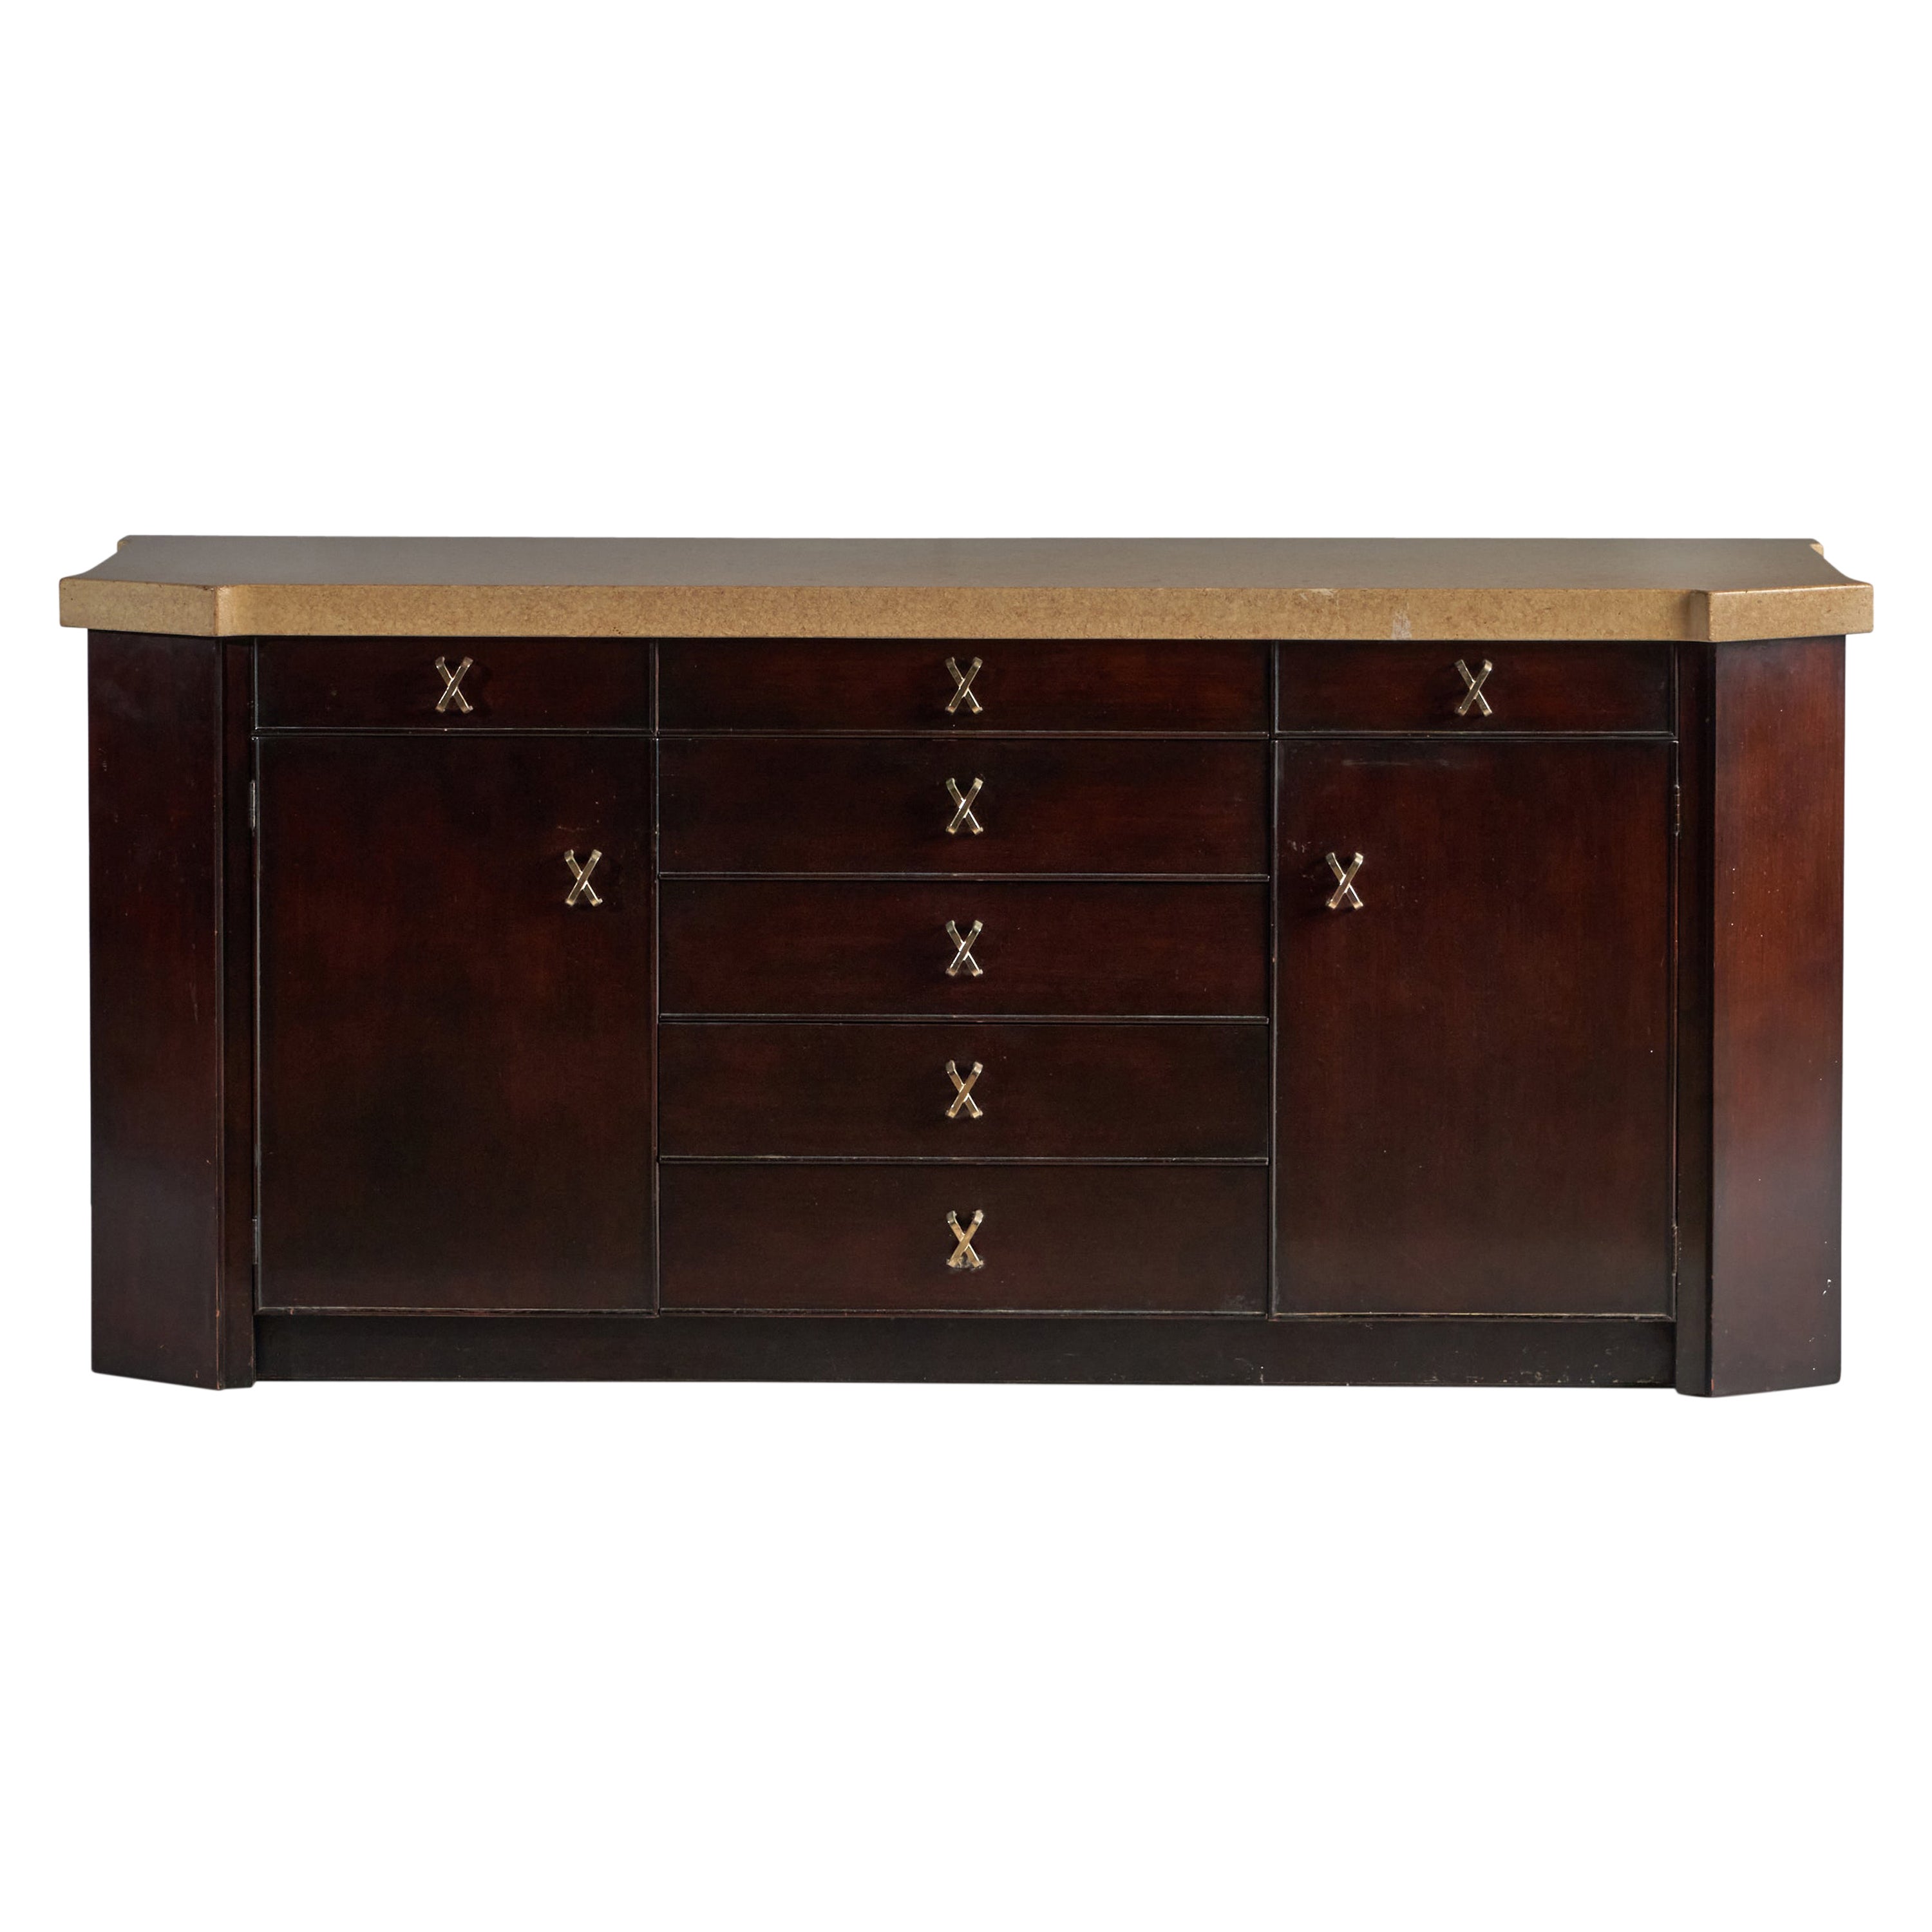 Paul Frankl, Cabinet, Mahogany, Cork, Brass, USA, 1950s For Sale